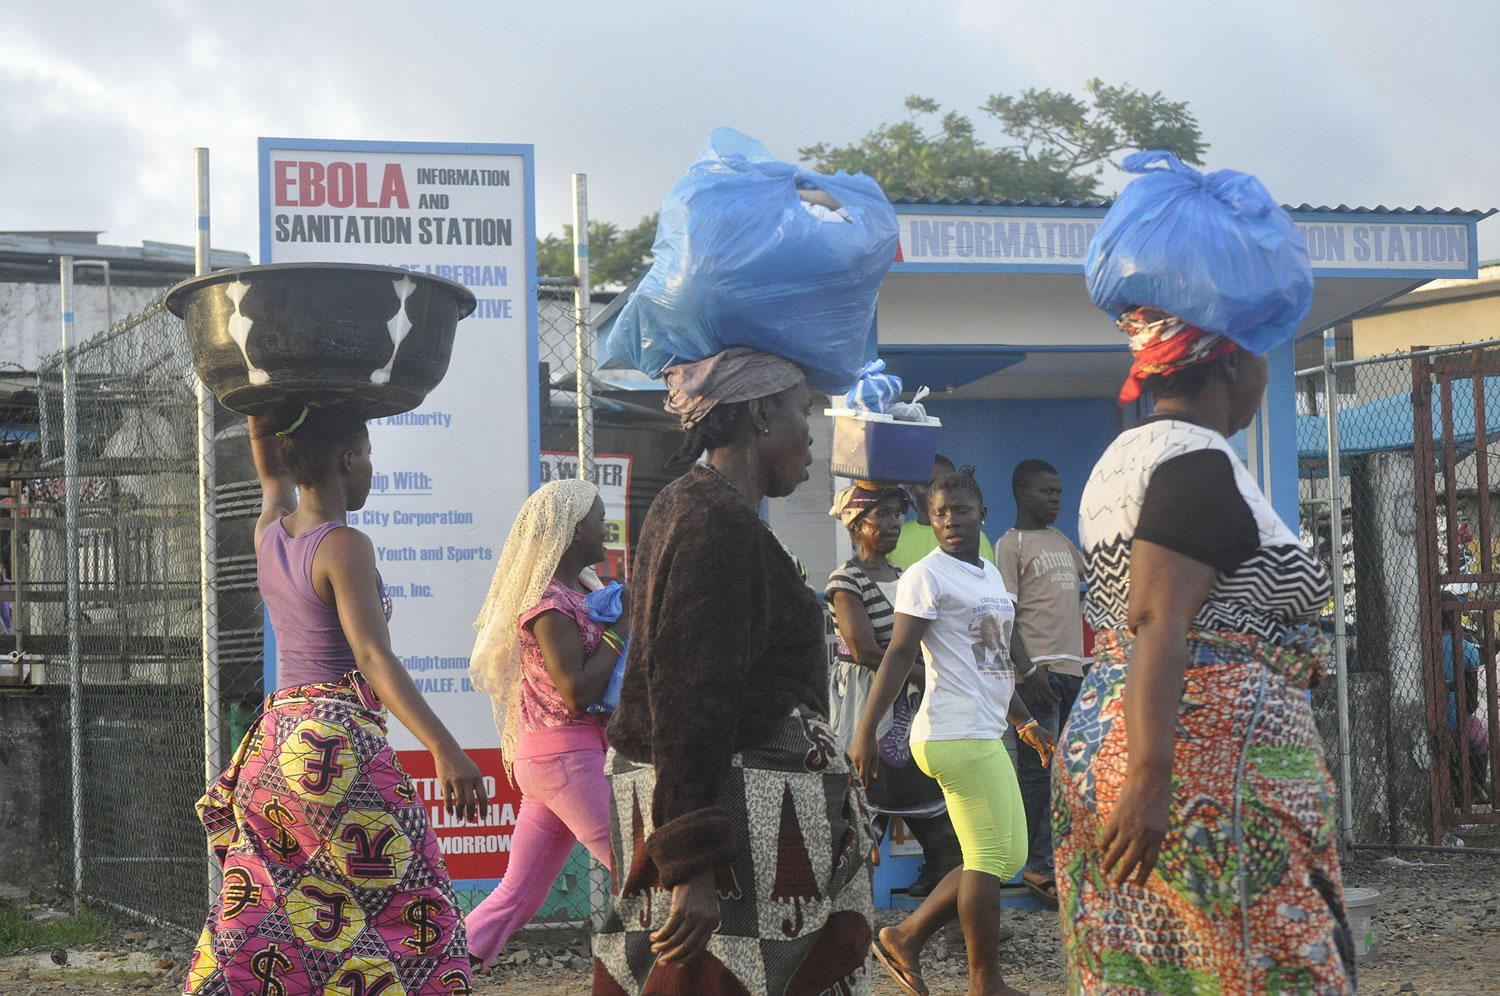 Liberia women walk past a sign warning people of the deadly Ebola virus in Monrovia, Liberia